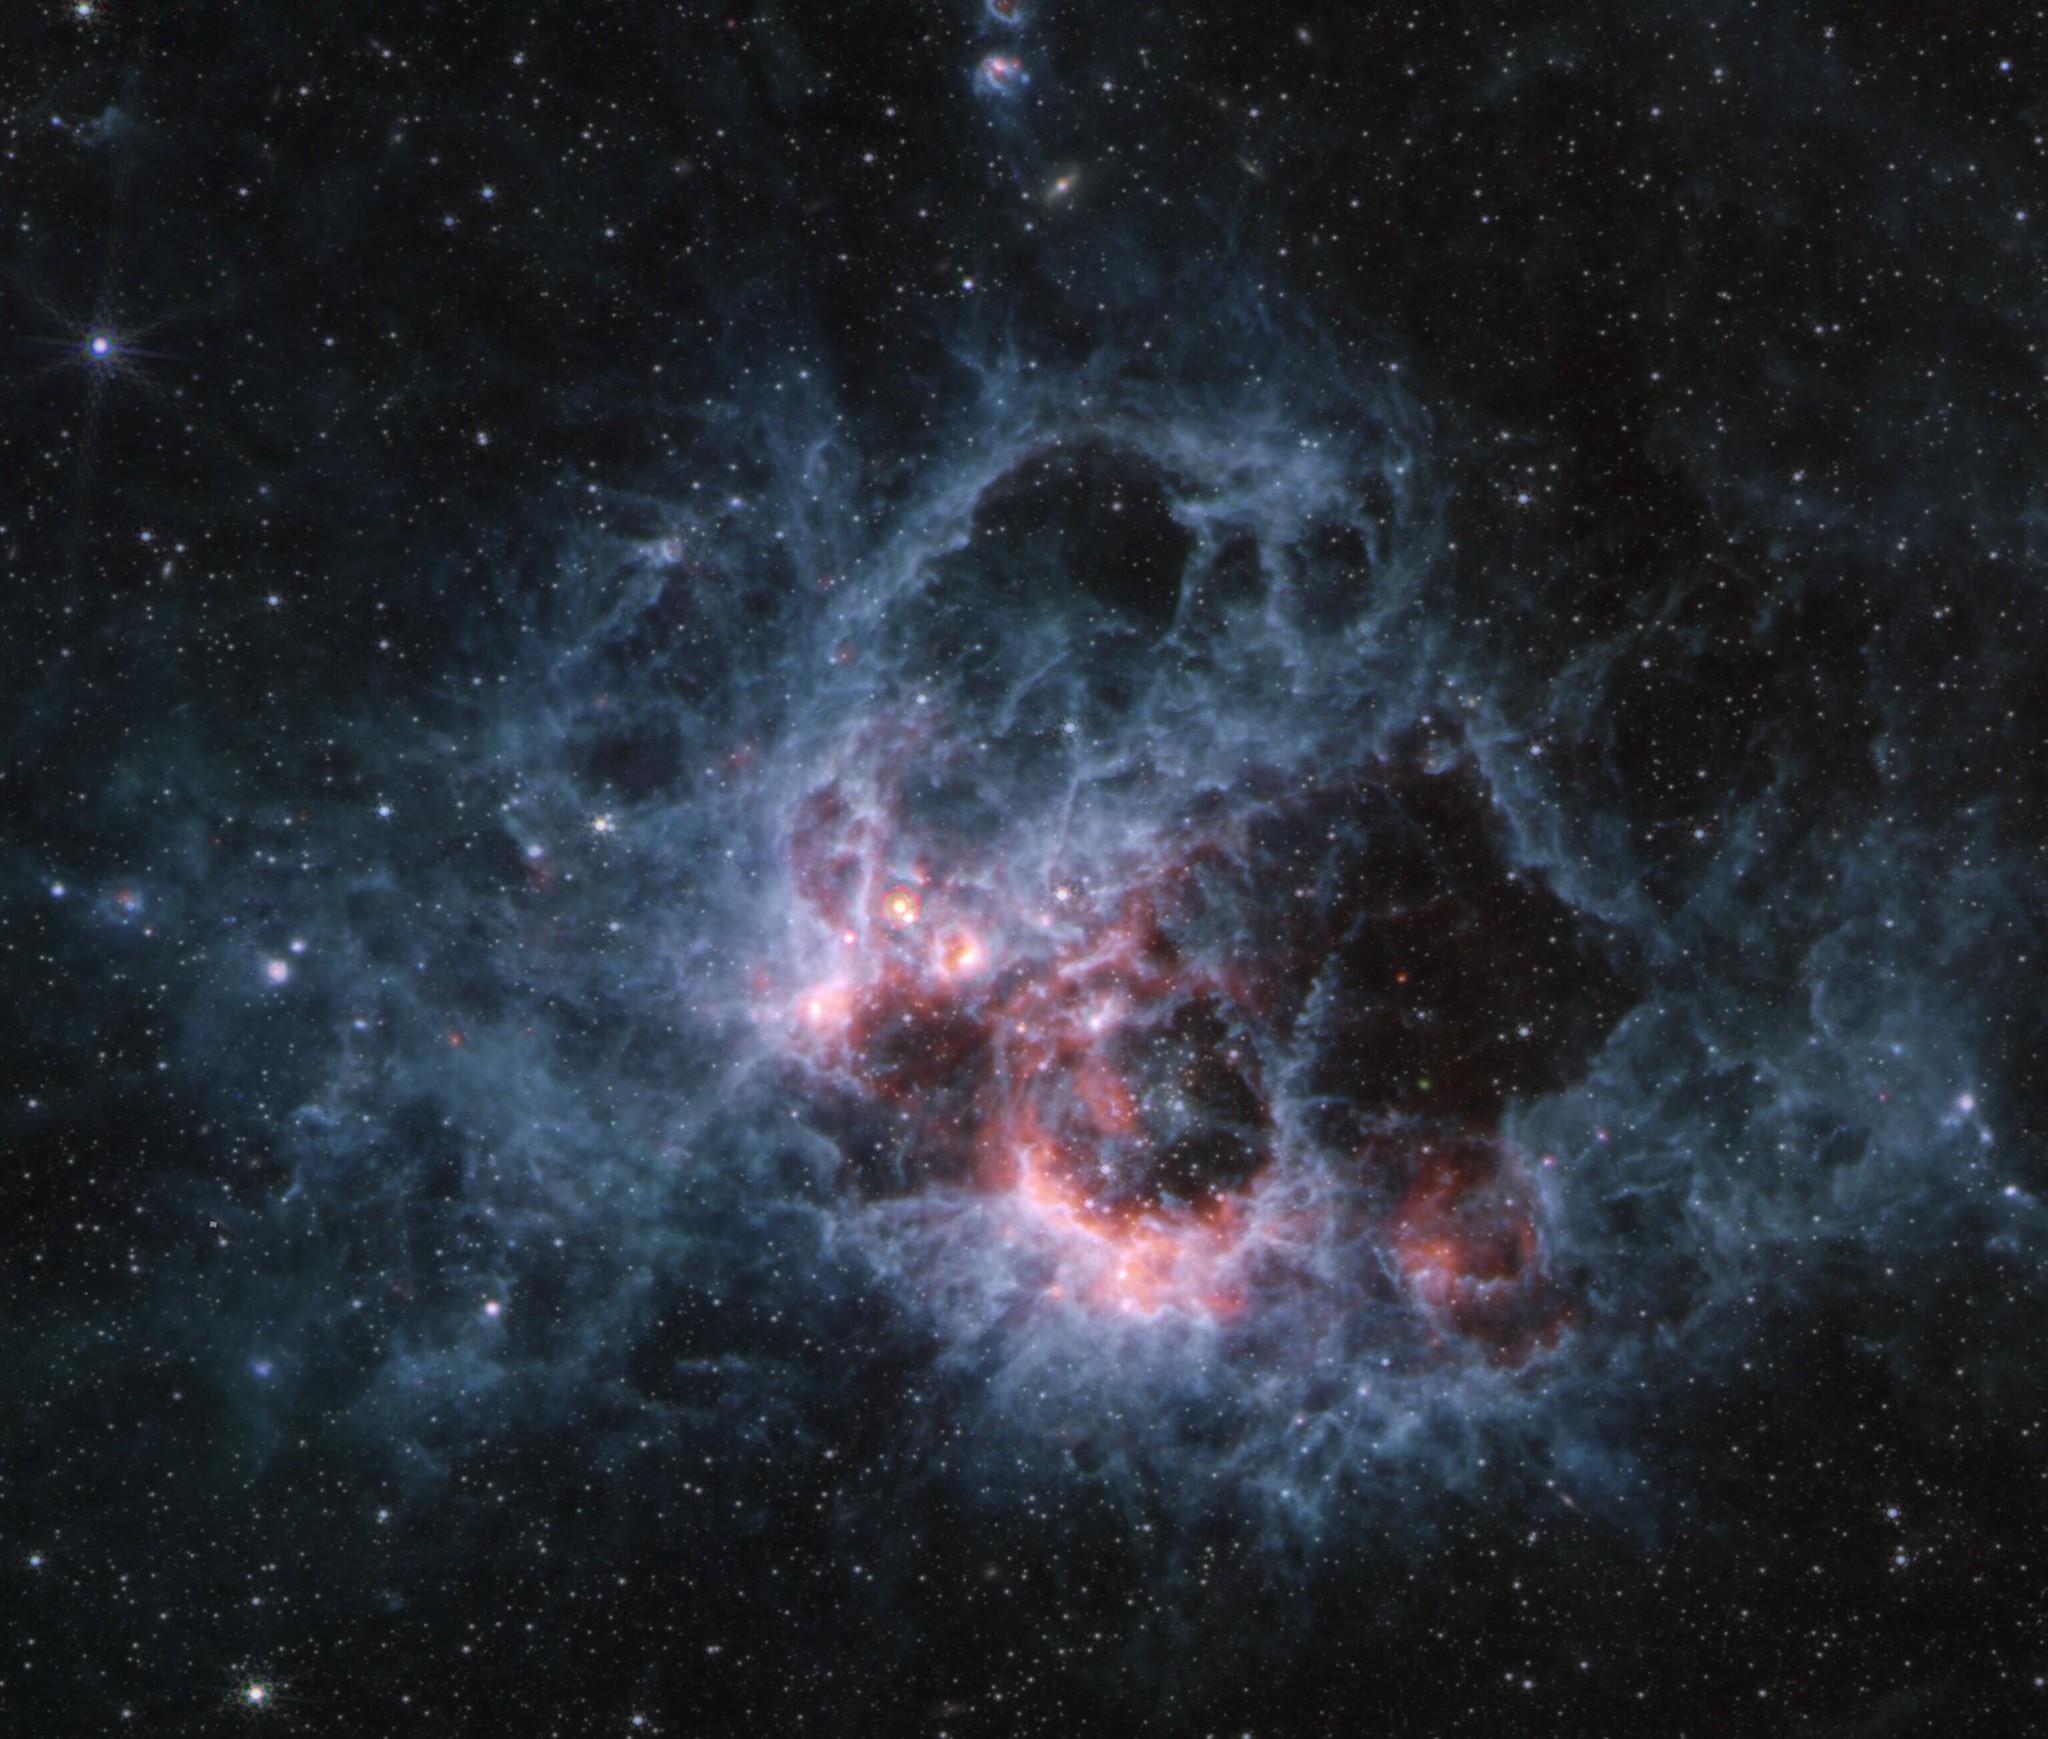 At the center of the image is a nebula set against the black background of space. The nebula is made up of thin strands of pale blue cloud. To the right of center of the blue clouds is a large cavernous bubble. The lower left edge of this cavernous bubble is filled with pink and white tones of gas. Surrounding the nebula are hundreds of faint stars.